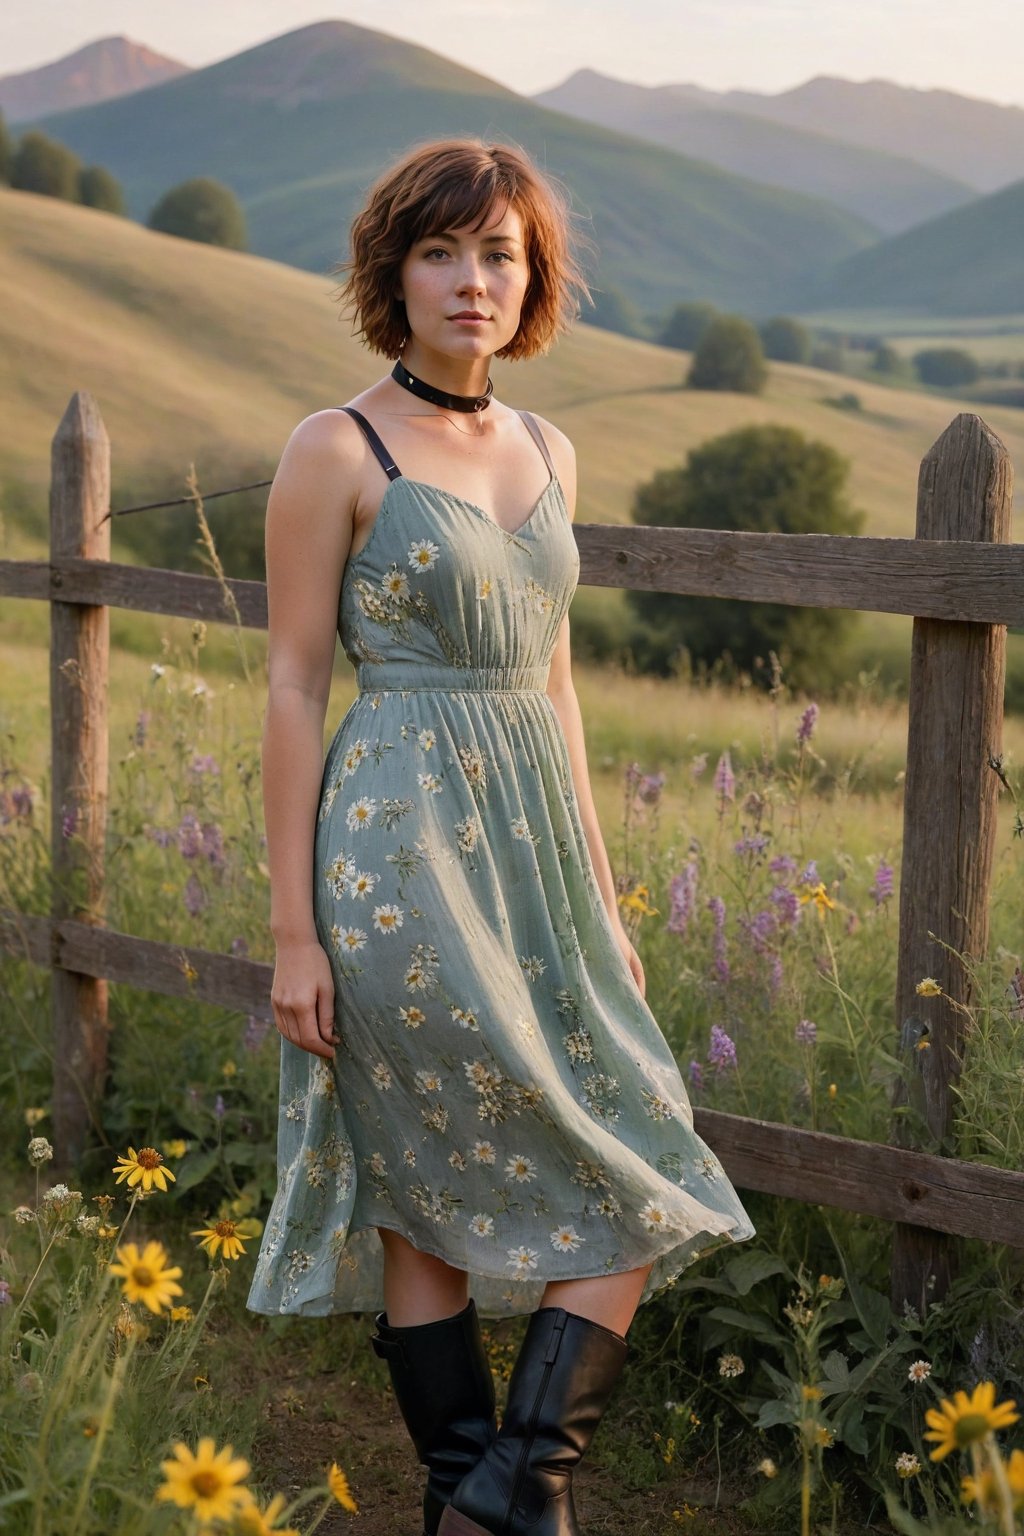 Young adult woman, (Caucasian ethnicity), slender build, (introspective expression), full-length pose, standing in (wildflower meadow), arms relaxed by sides, (long flowing green floral dress), (black choker necklace), (auburn bob haircut with bangs), facing camera, soft smile, (vintage leather boots), (golden hour lighting), (rustic wooden fence in the background), expansive blue sky, (hazy mountains in the distance), peaceful, natural setting, wide shot for environmental context.), looking away from the camera, serene atmosphere.
JuggernautNegative, Movie Still, Film Still, Cinematic, Cinematic Shot, Cinematic Lighting, badquality.
Aligned eyes,  Iridescent Eyes,  (blush,  eye_wrinkles:0.6),  (goosebumps:0.5),  subsurface scattering,  ((skin pores)),  (detailed skin texture),  (( textured skin)),  realistic dull (skin noise),  visible skin detail,  skin fuzz,  dry skin,  hyperdetailed face,  sharp picture,  sharp detailed,  (((analog grainy photo vintage))),  Rembrandt lighting,  ultra focus,  illuminated face,  detailed face,  8k resolution,Extremely Realistic, 